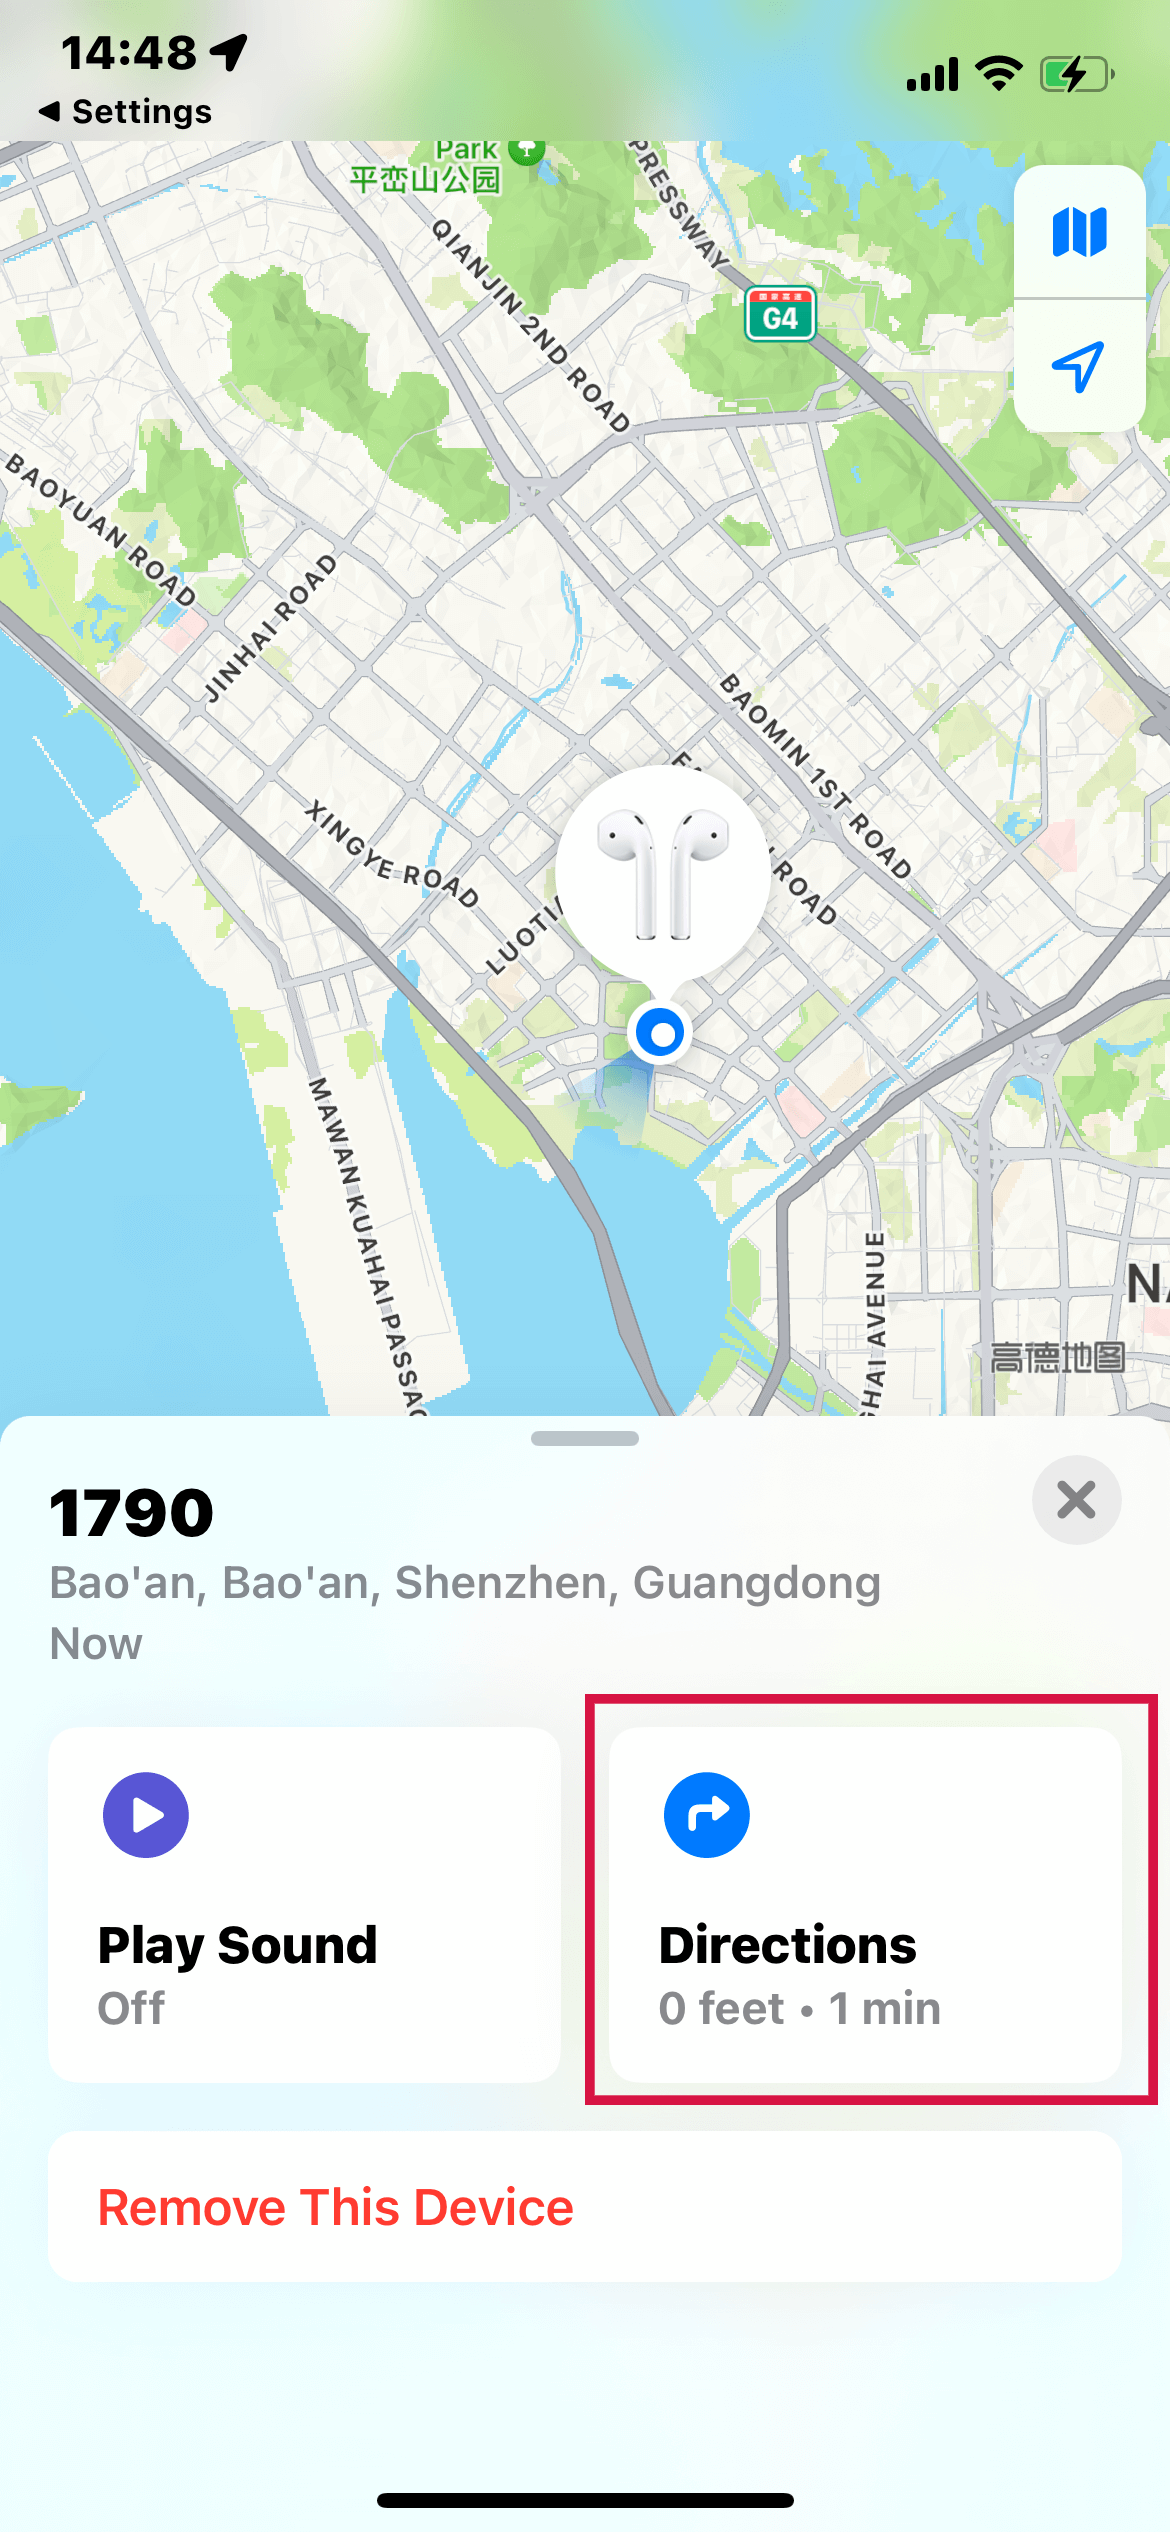 Find My App Directions to Find Your AirPods